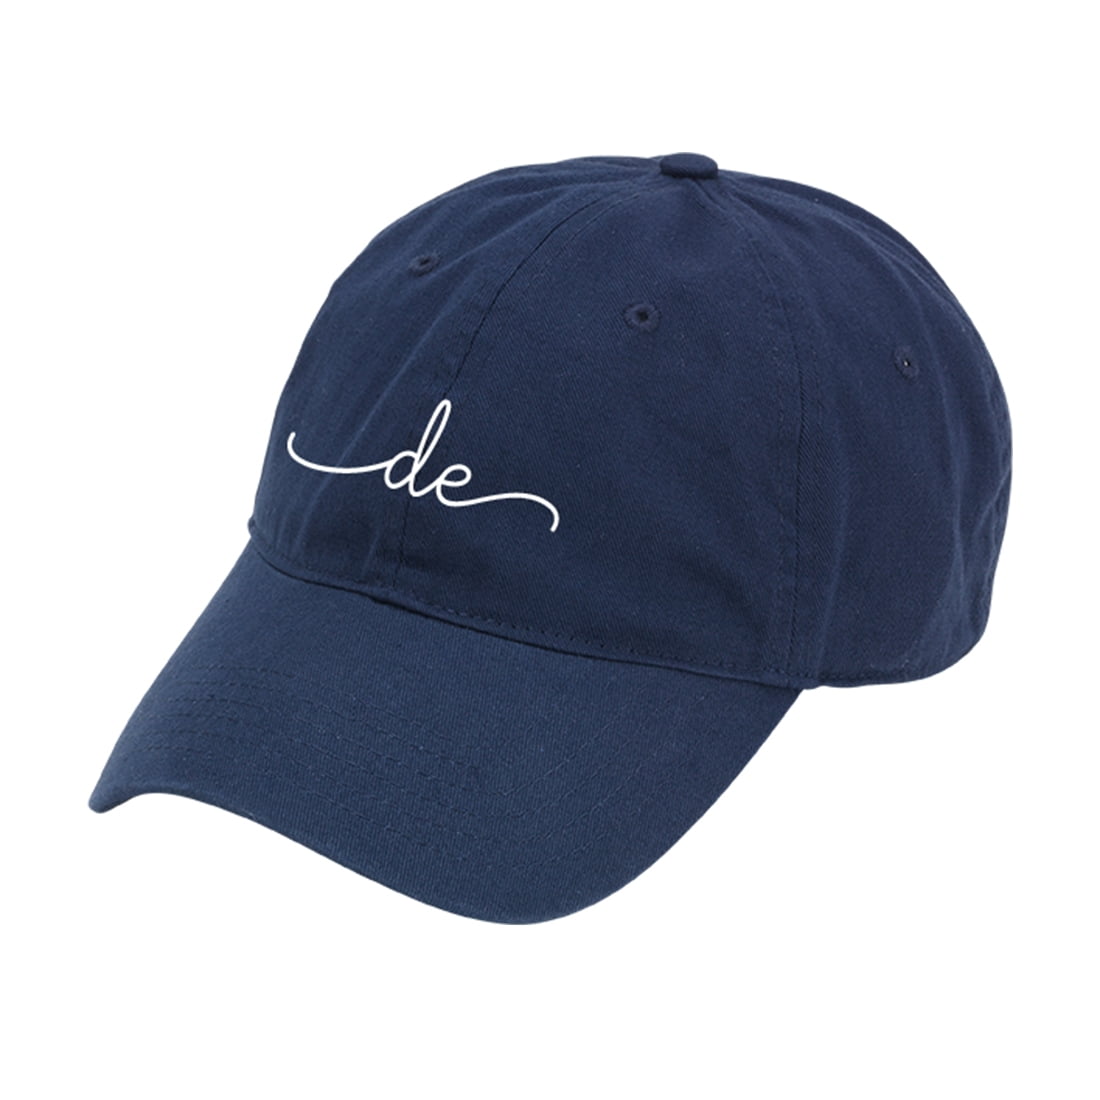 Delaware Rep Your State Navy Cap